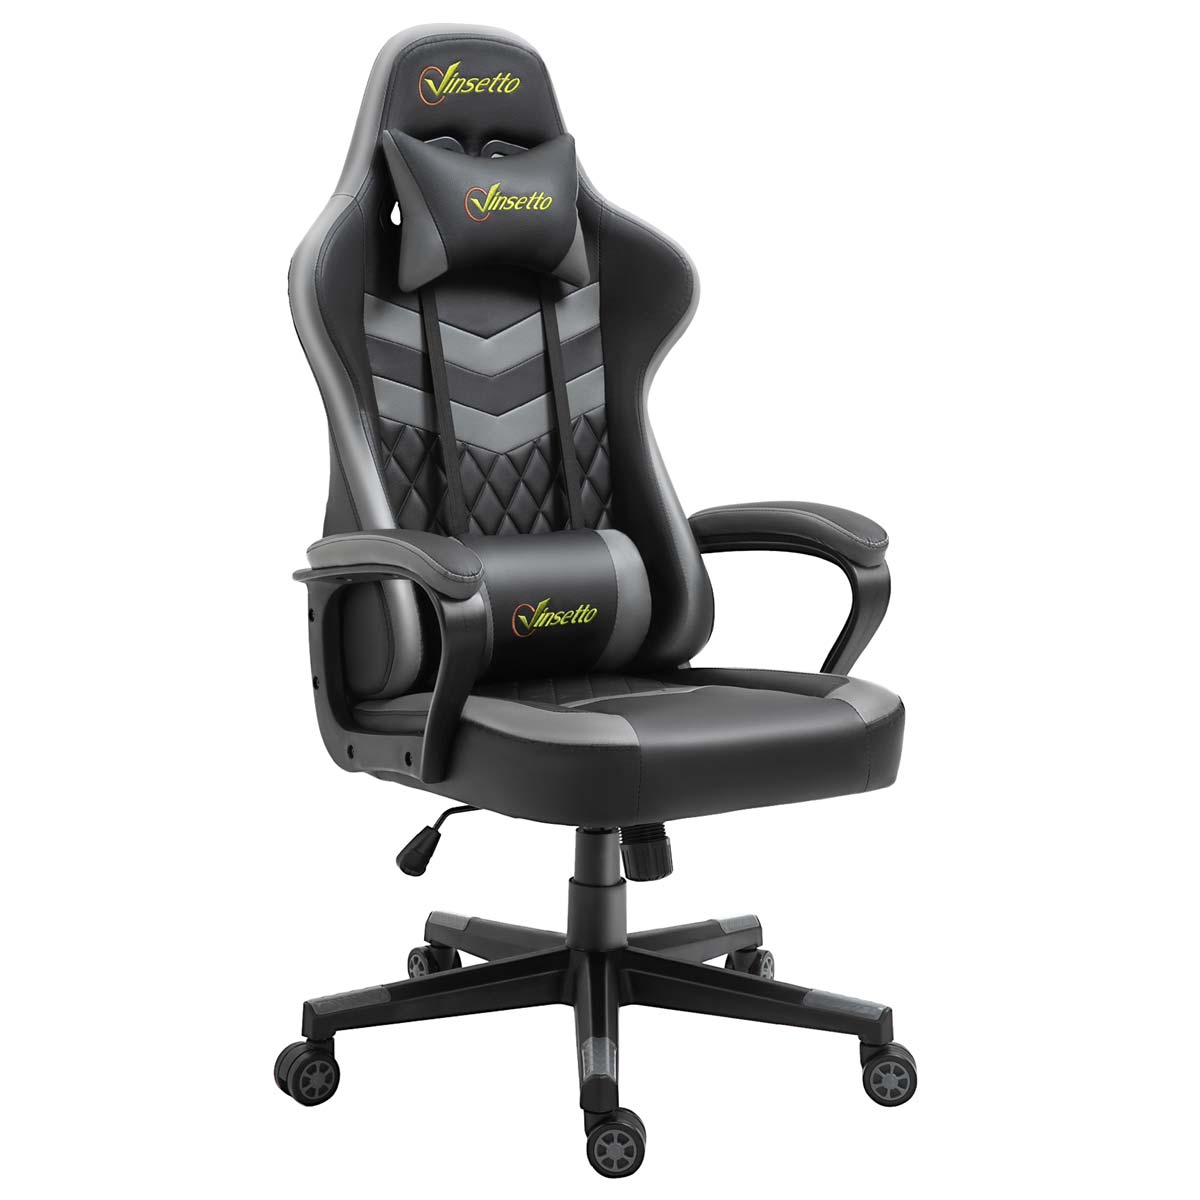 Vinsetto Racing Gaming Chair W/ Lumbar Support Gamer Office Chair - Black & Grey